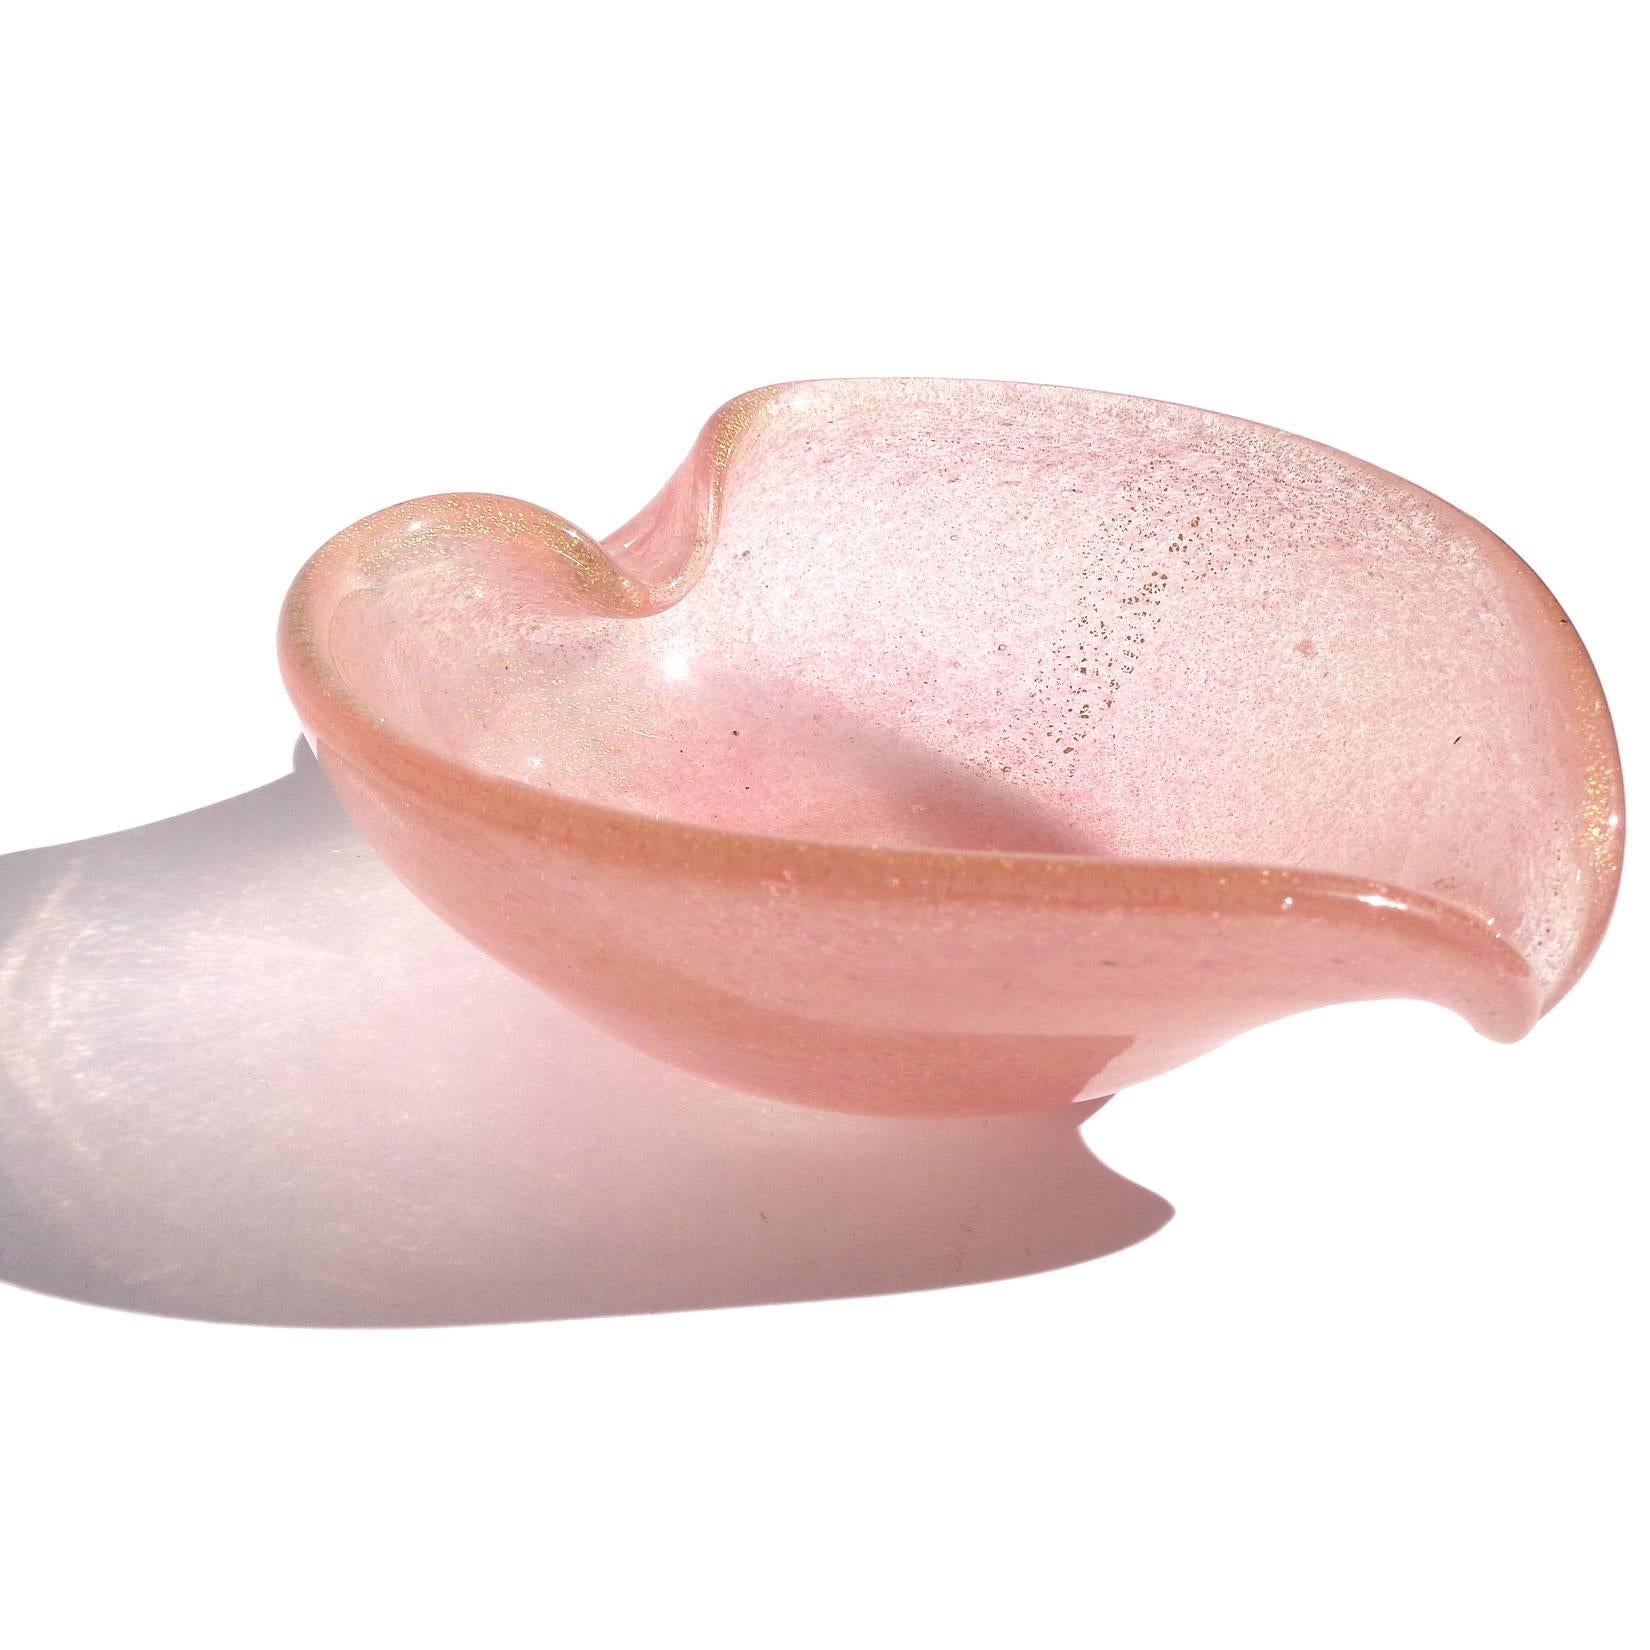 Free shipping worldwide! See details below description.

Beautiful set of four Murano handblown pink and gold flecks art glass heart shaped bowls. In the manner of designers Alfredo Barbini and Archimede Seguso. The color is made of tiny spots of